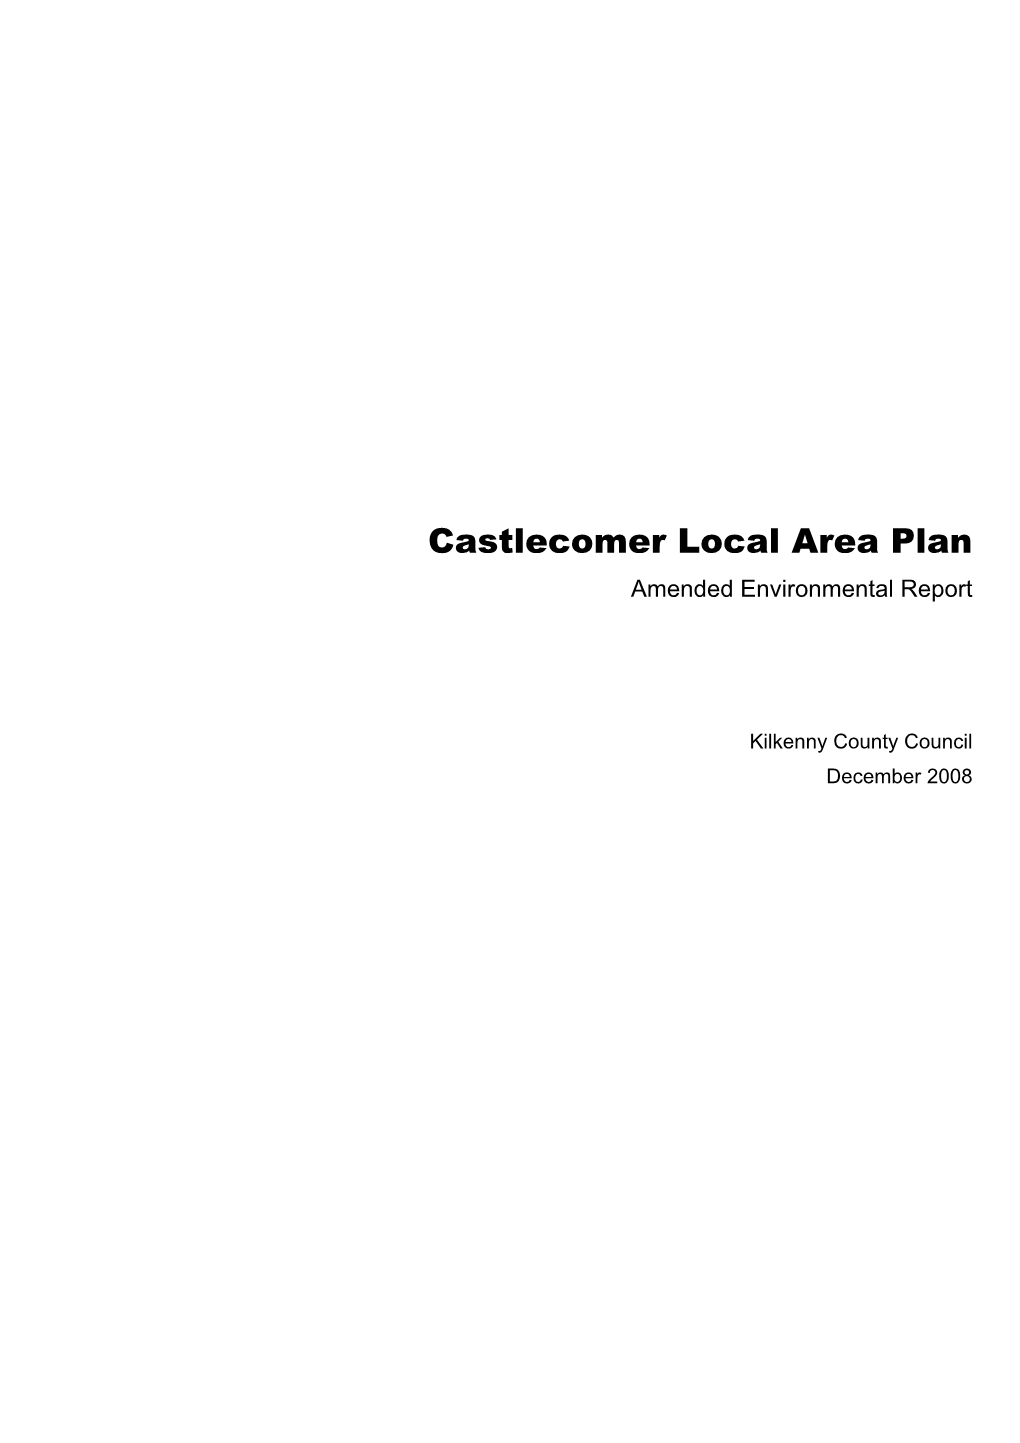 Castlecomer Local Area Plan Amended Environmental Report